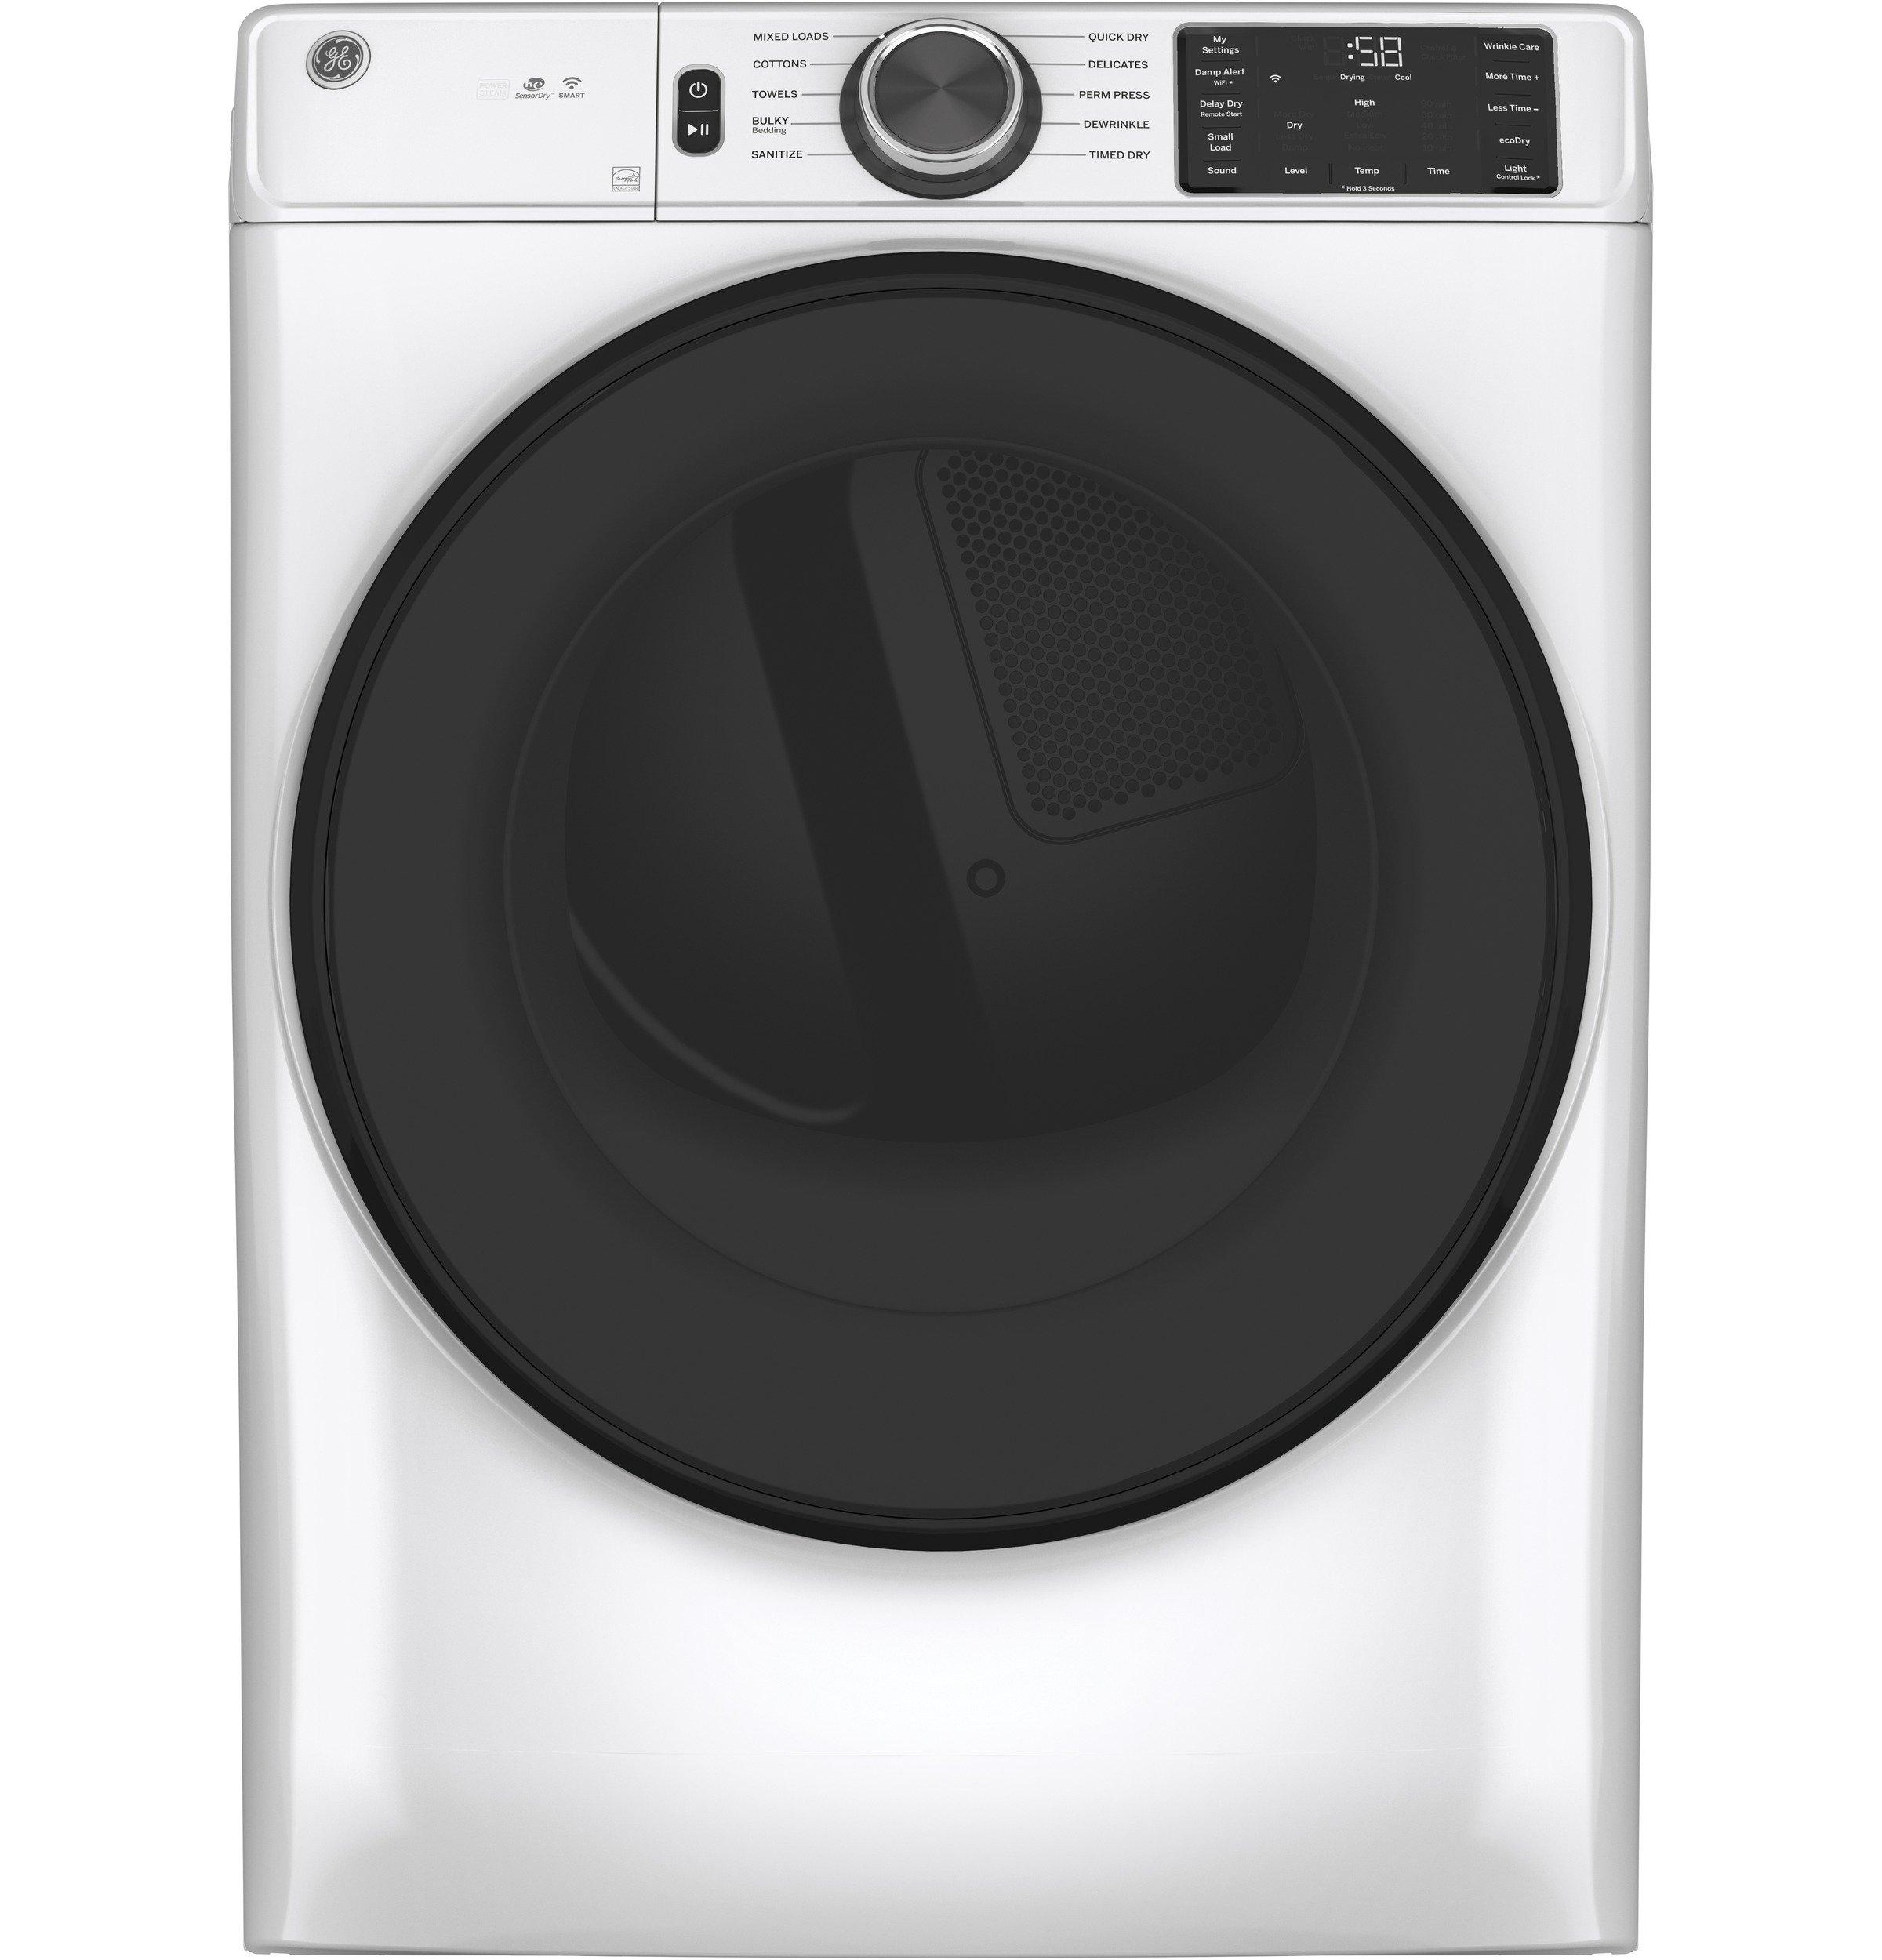 Rent to Own GE Appliances Space Saving 3.0 cu. ft. Top Load Washer & 3.6  cu. ft. 120 Volt Electric Portable Compact Dryer at Aaron's today!